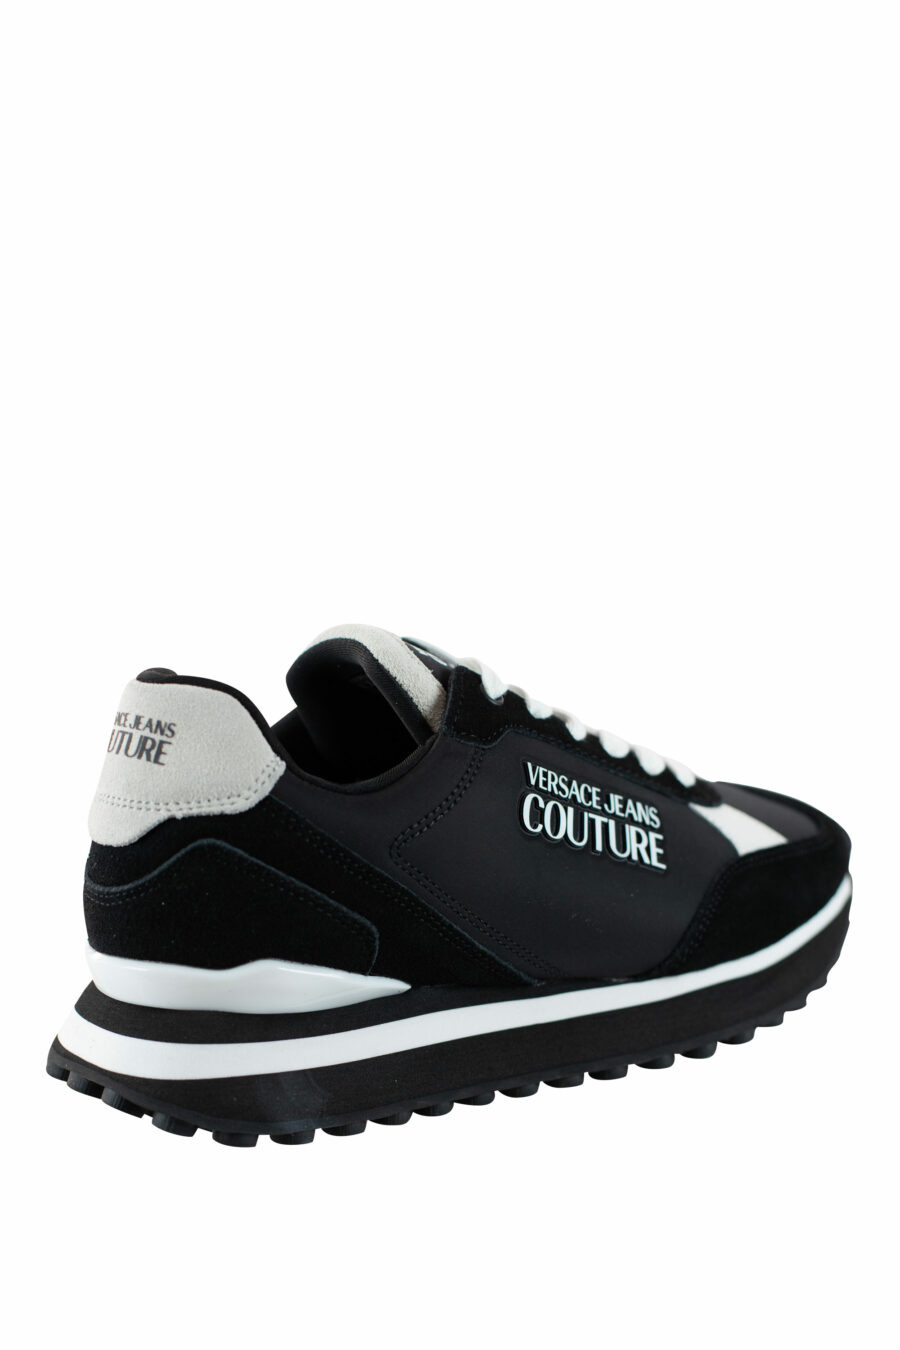 Trainers black with beige "spyke" with white logo - IMG 4533